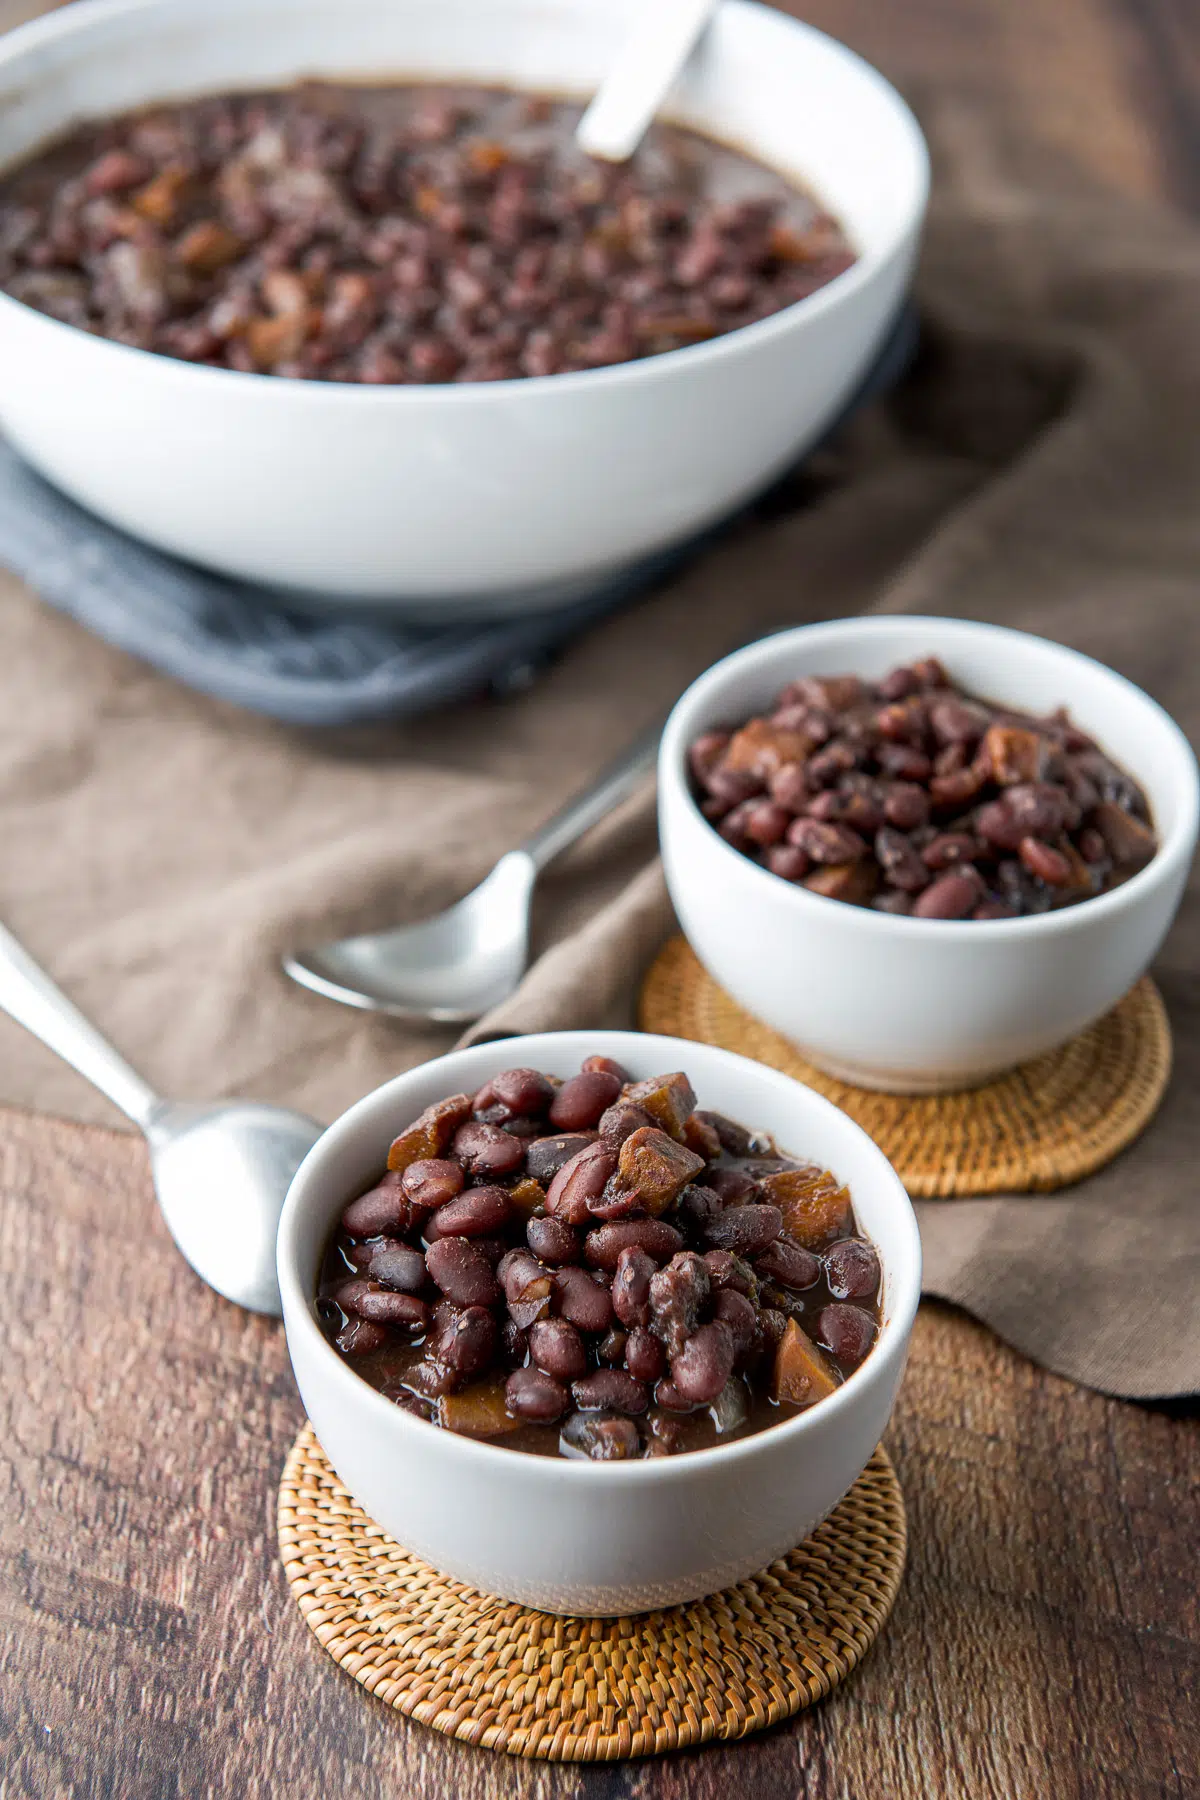 Two small bowls and a serving bowl filled with the beans